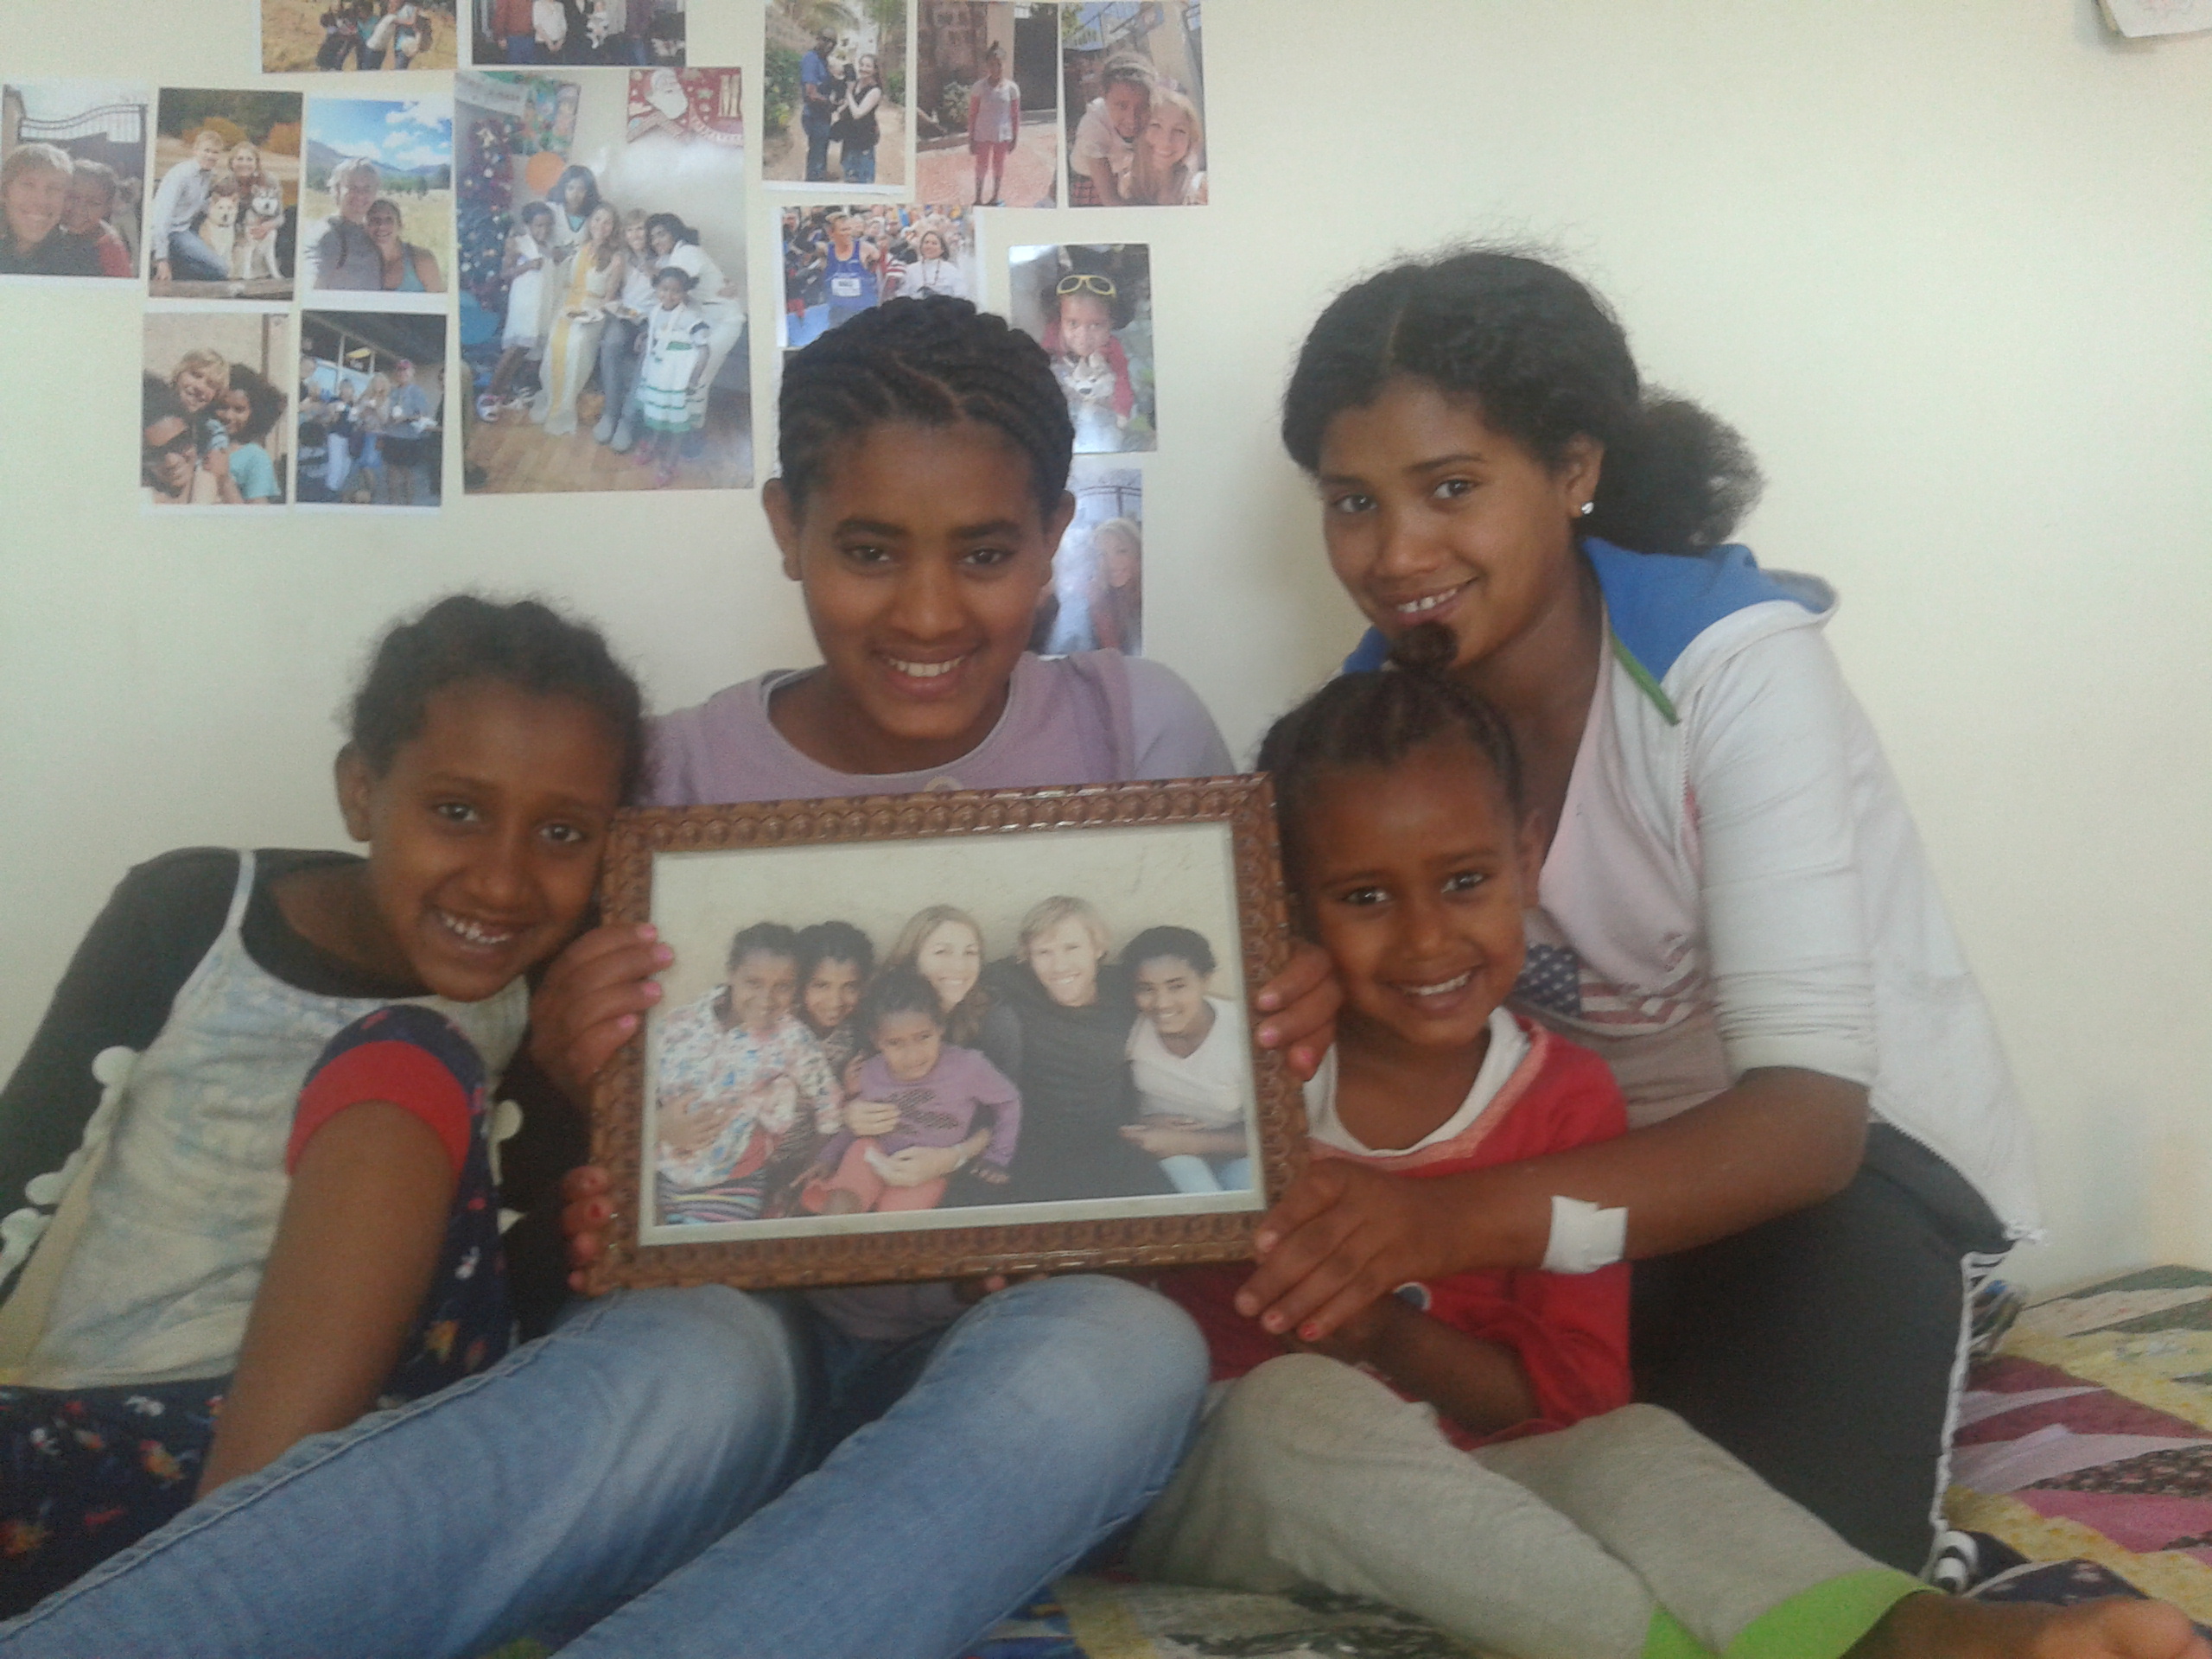 Waiting for us in Ethiopia but already a family